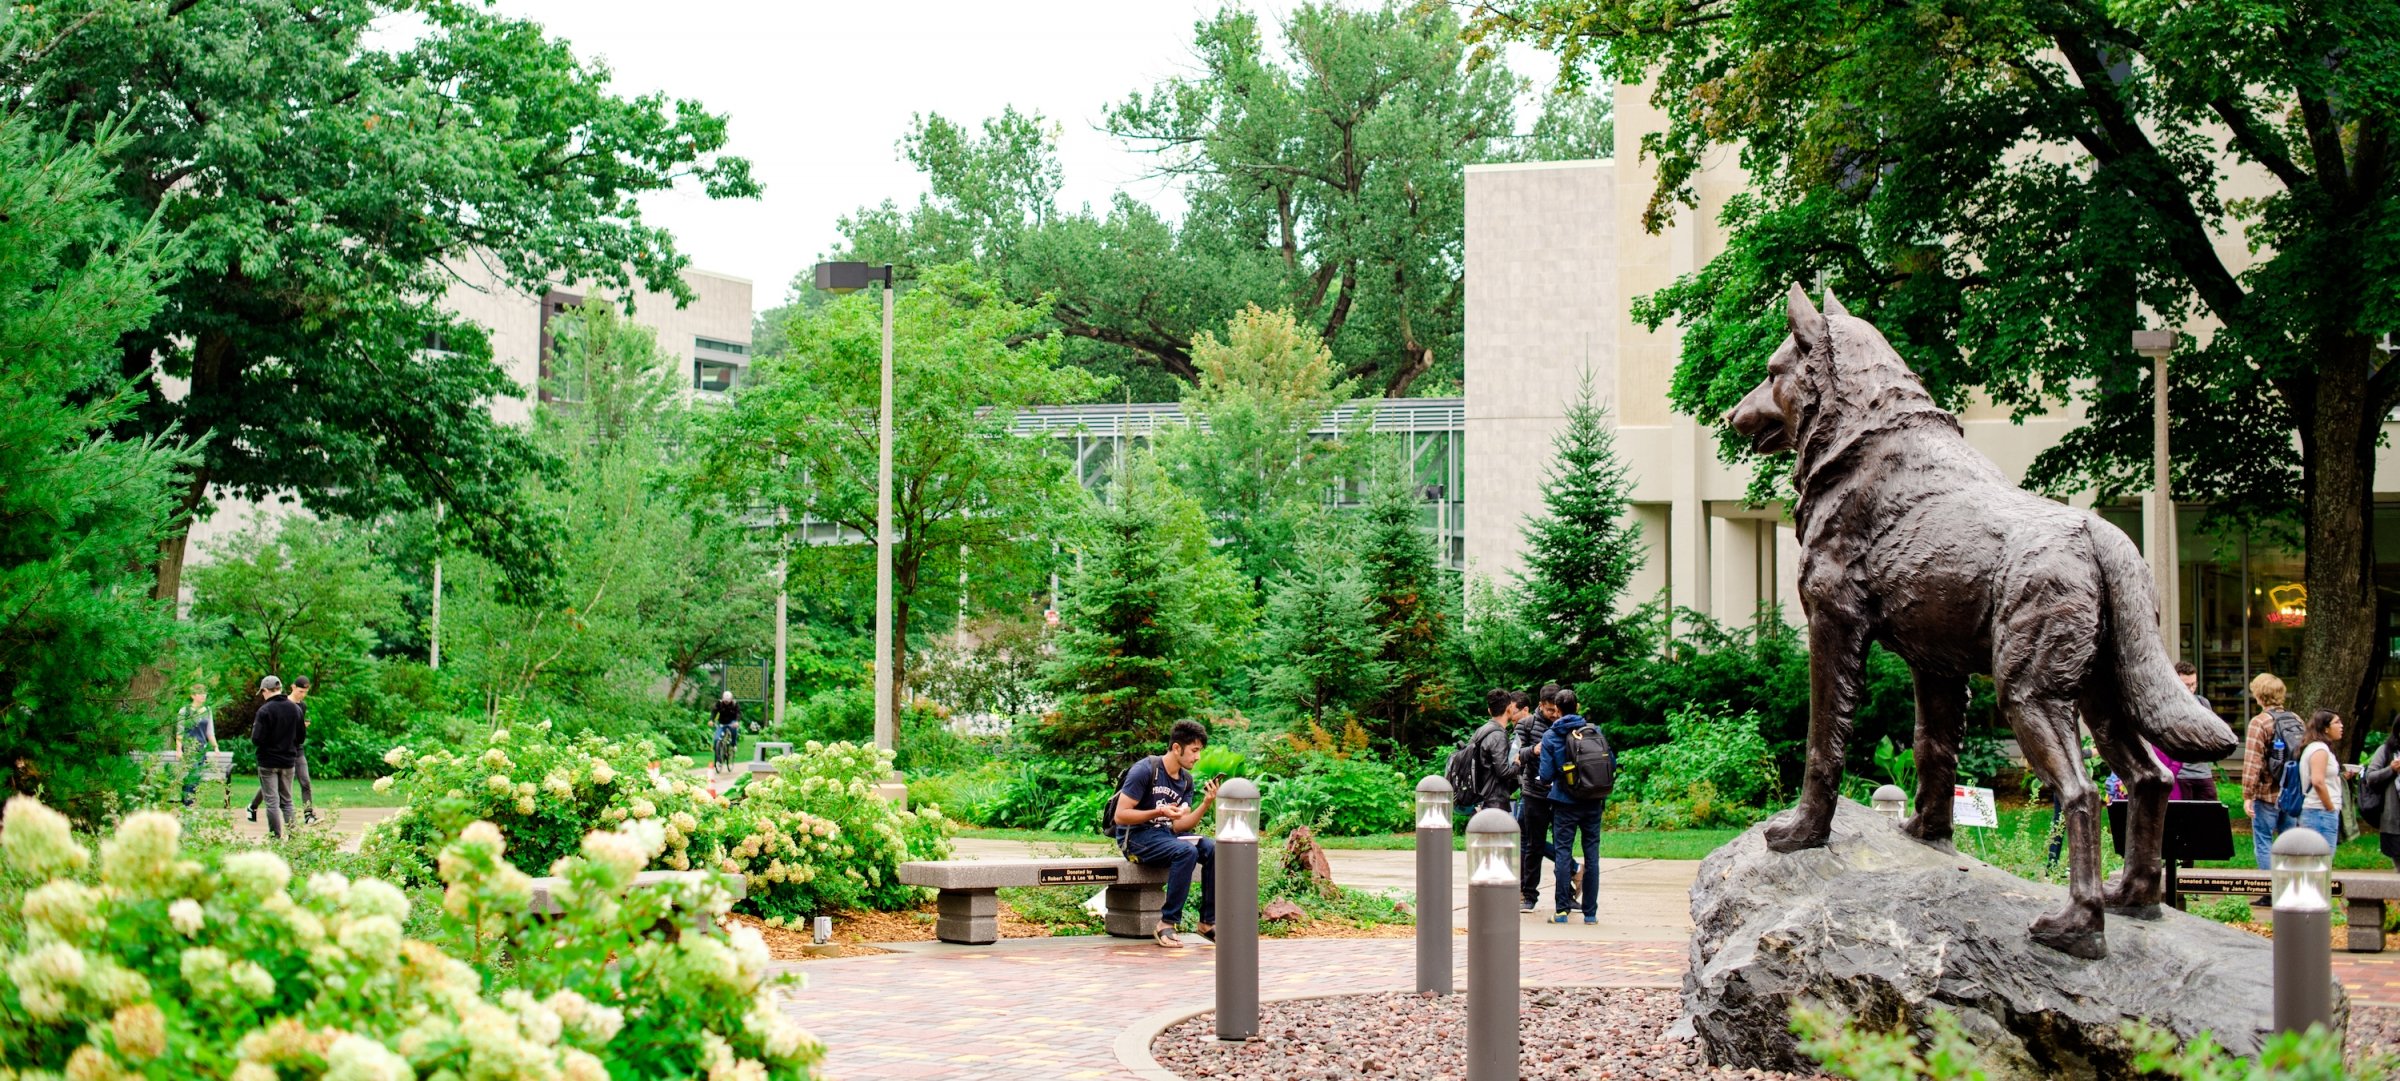 MTTI Membership, with campus mall in summer showing people by the Husky statue.